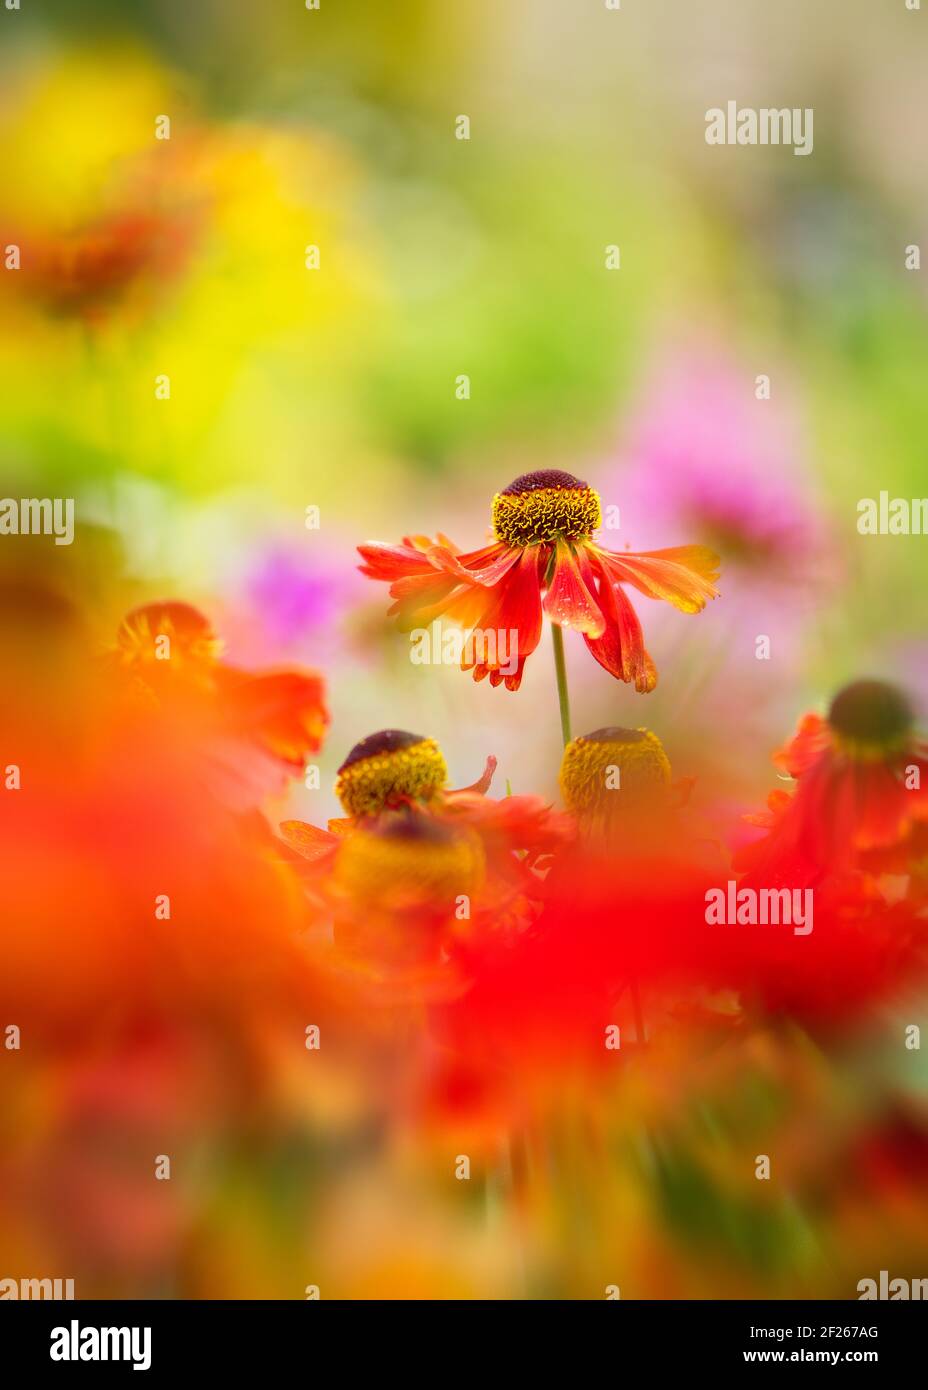 A pretty, artistic, colorful cottage garden portrait of helenium flowers against a beautiful blurred background and foreground. Stock Photo